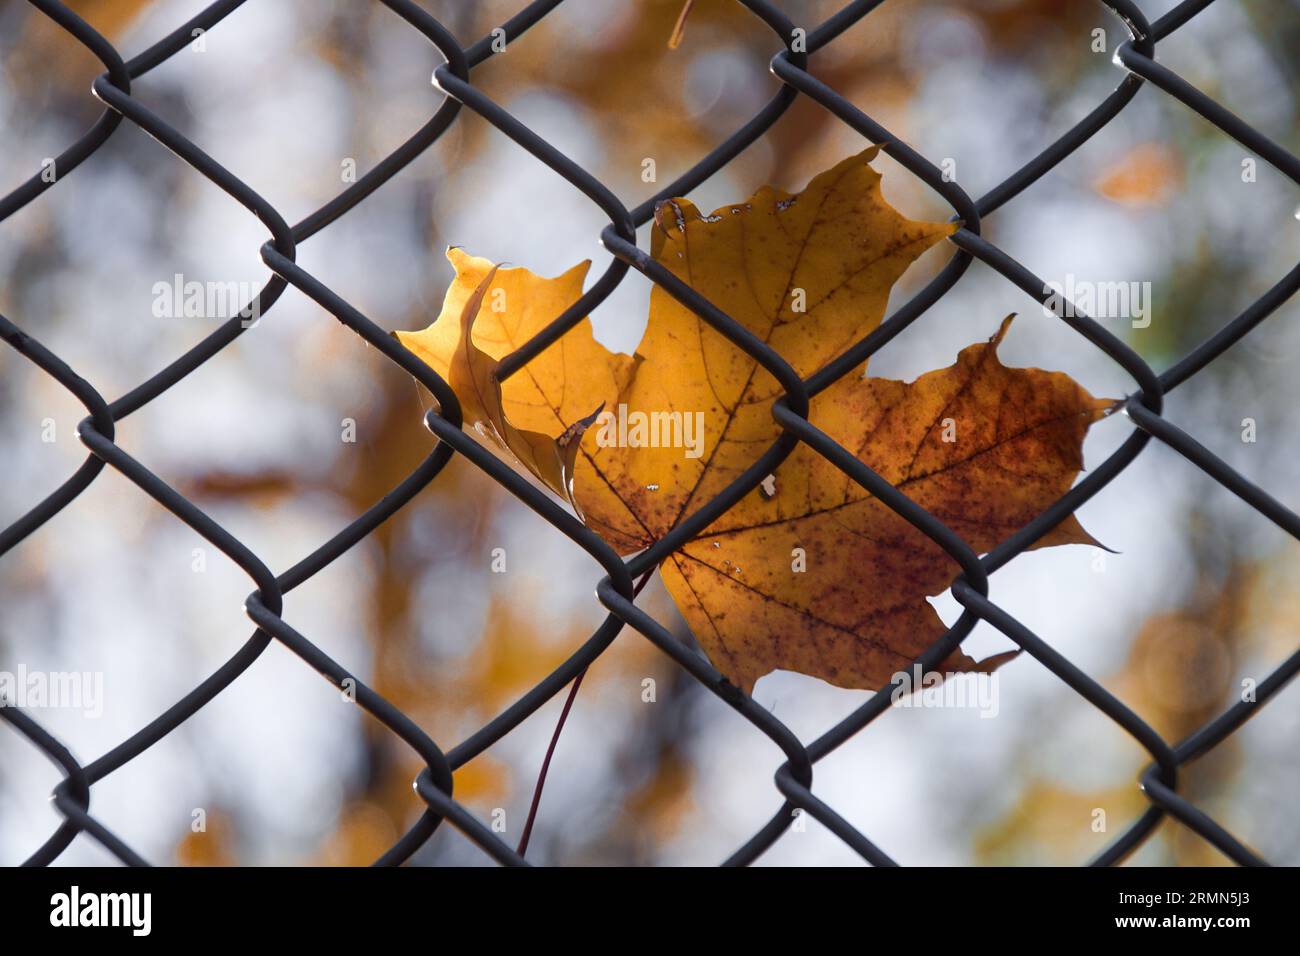 Close-up of dry maple leaf on chainlink fence Stock Photo